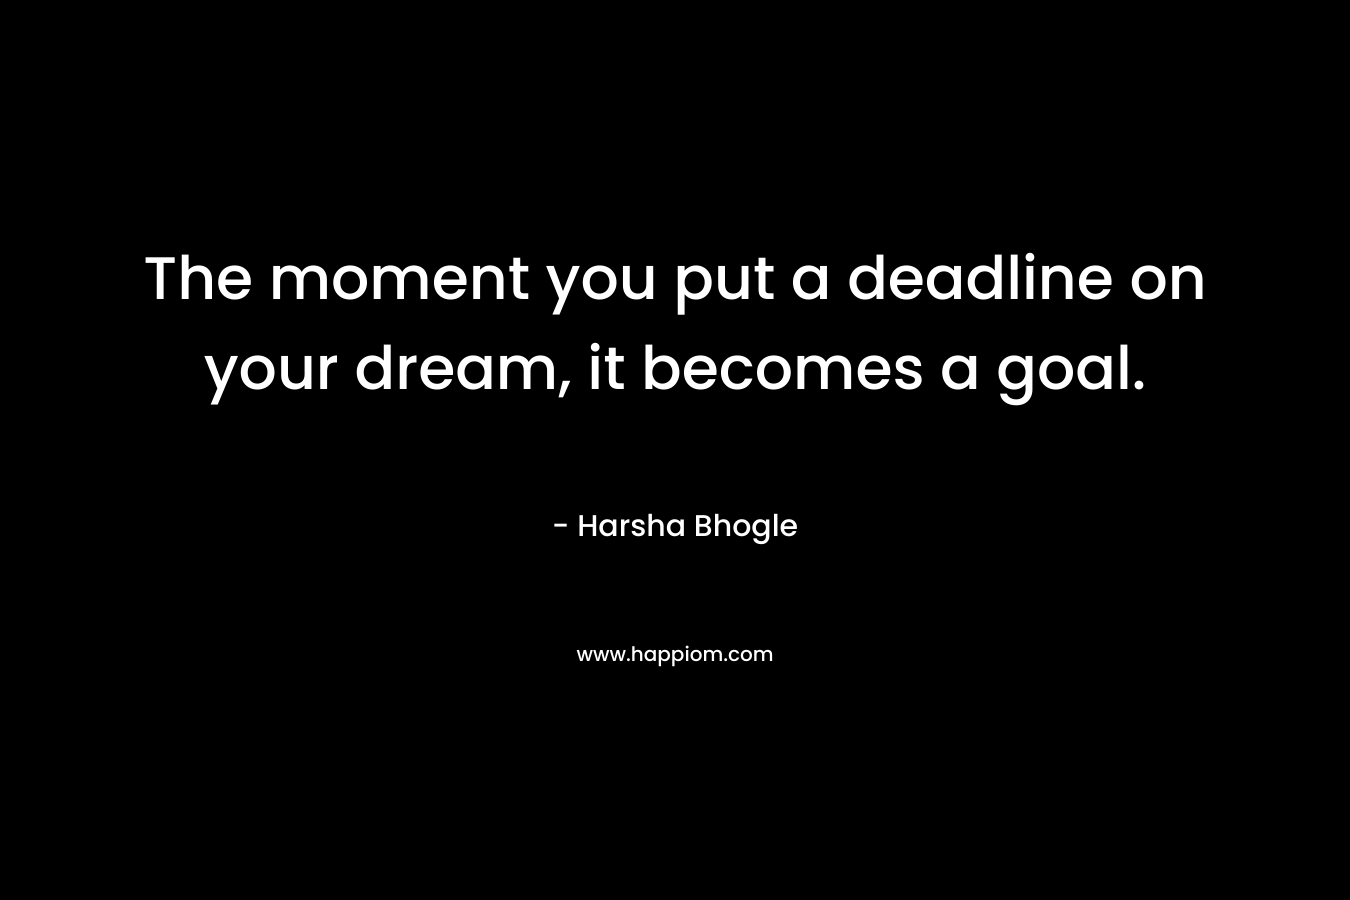 The moment you put a deadline on your dream, it becomes a goal. – Harsha Bhogle